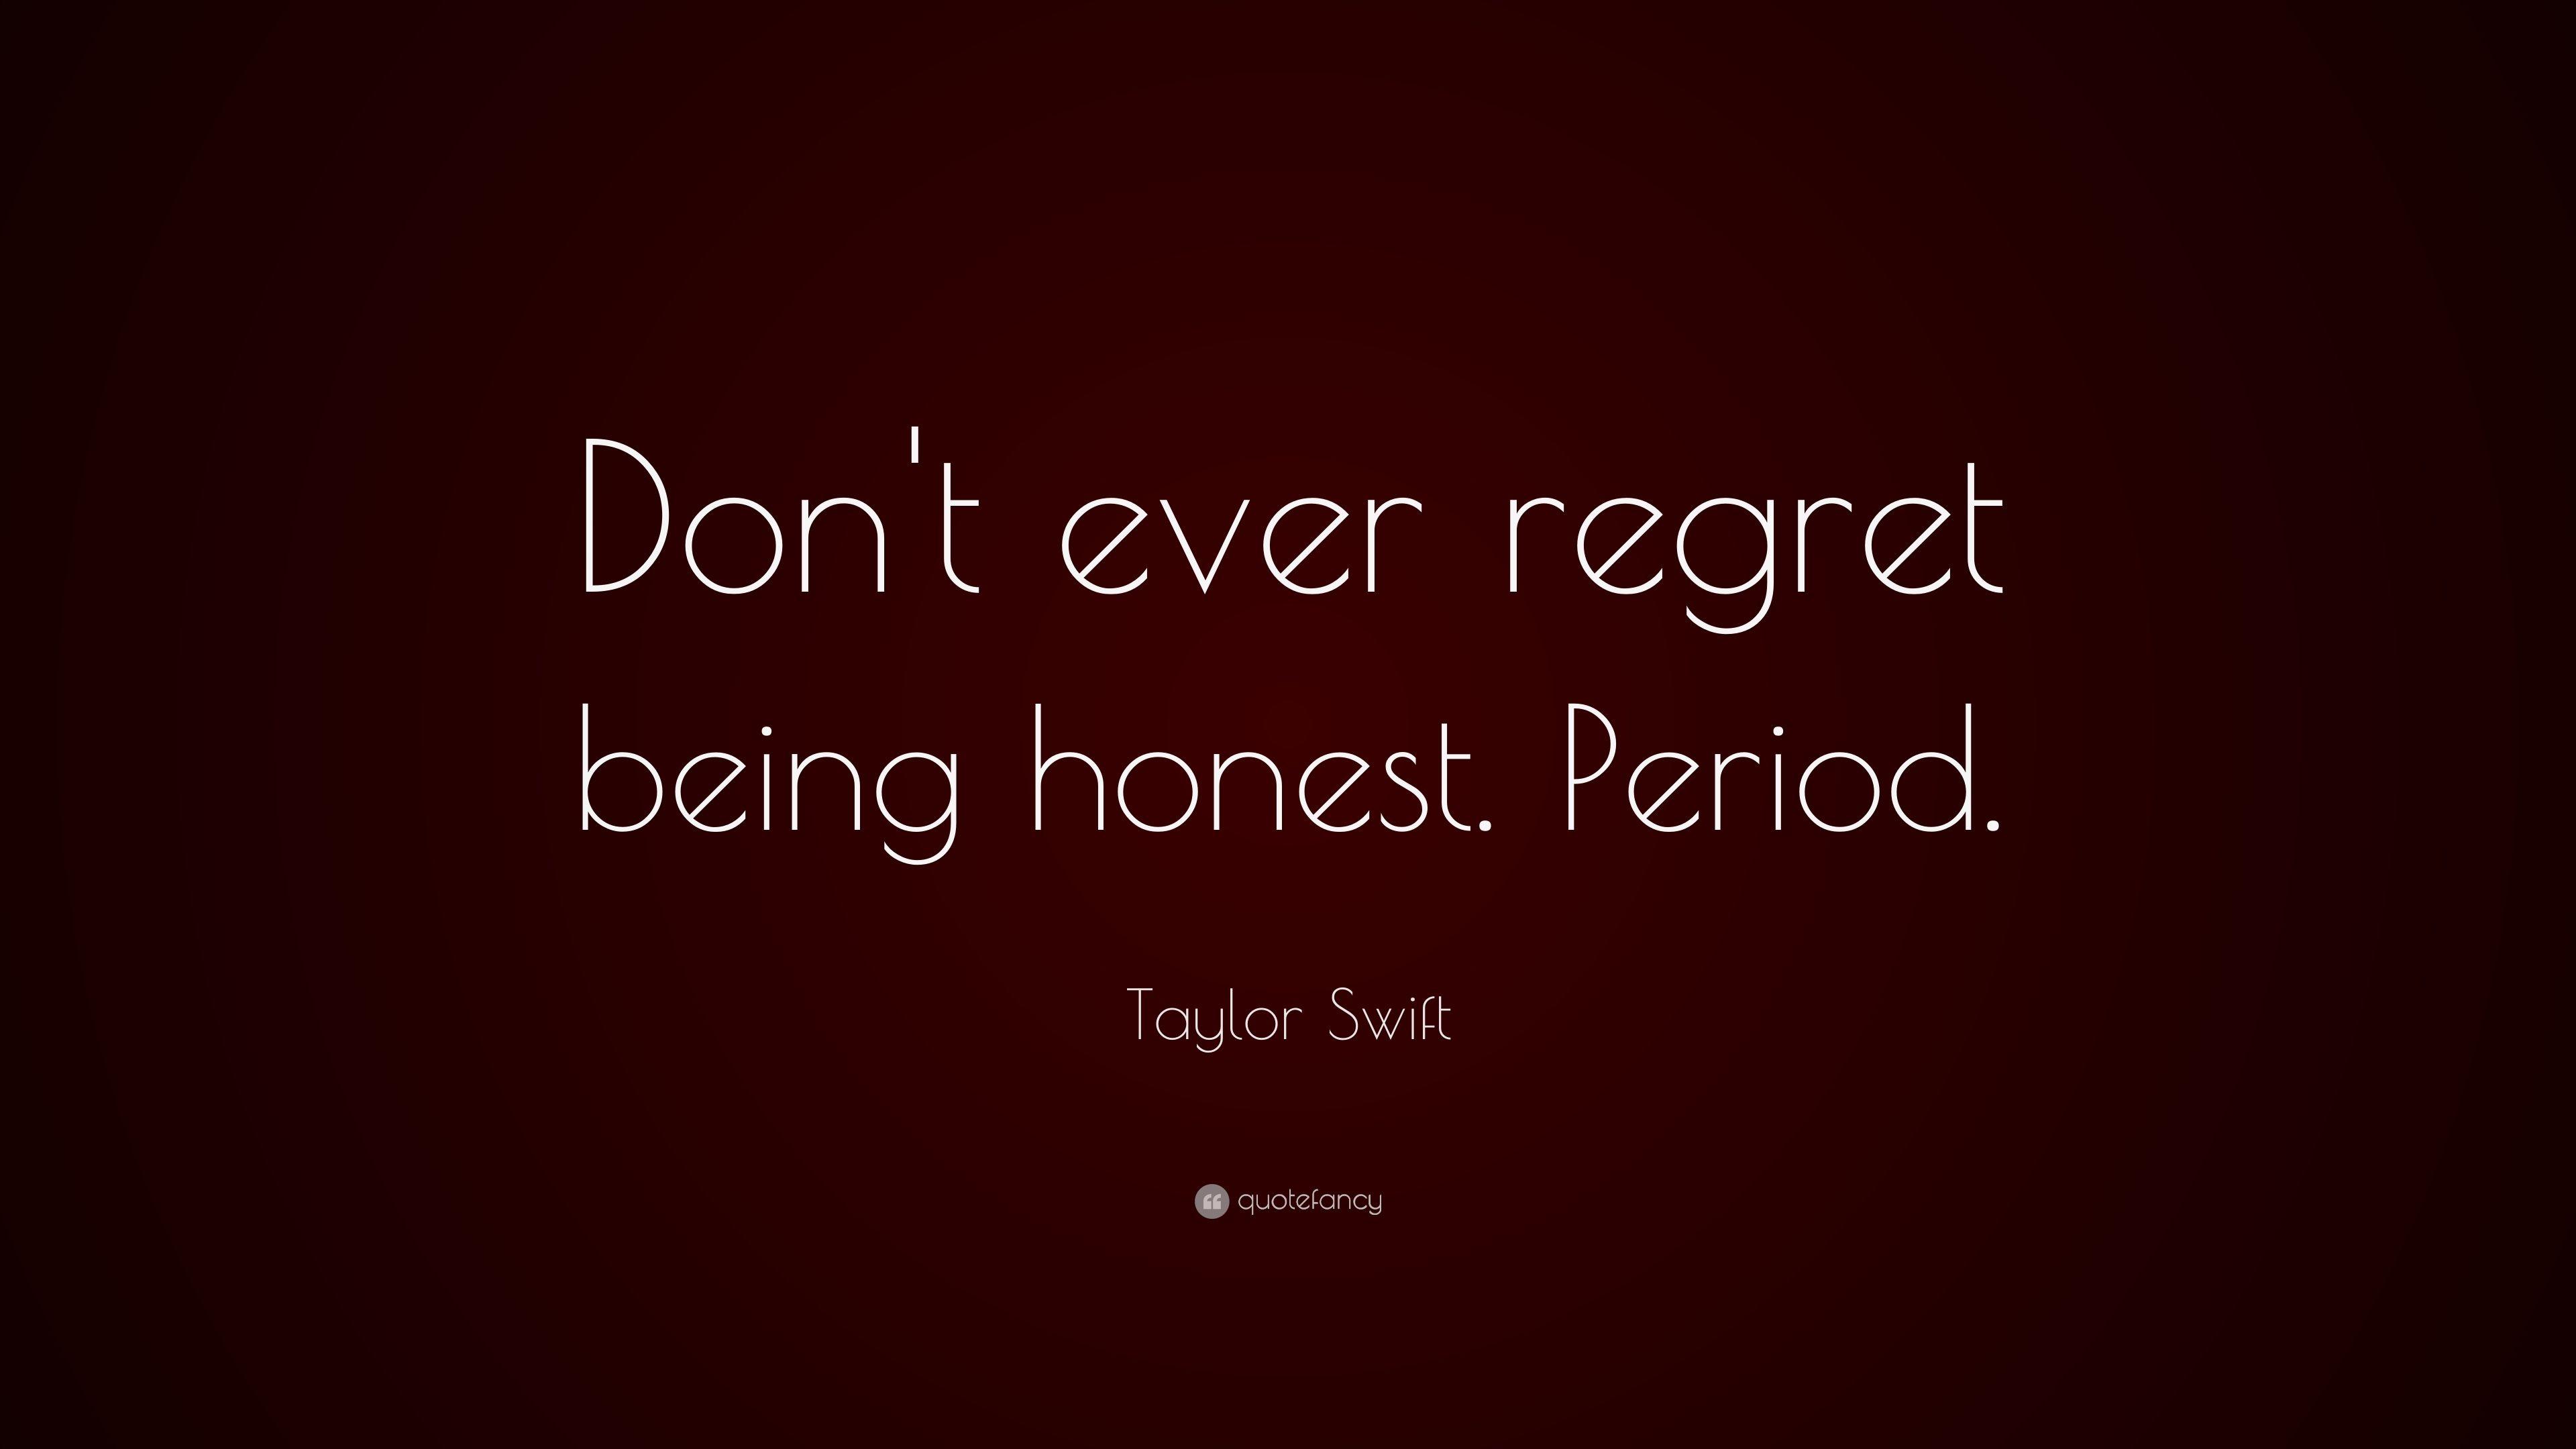 Taylor Swift Quote: “Don't ever regret being honest. Period.” 14